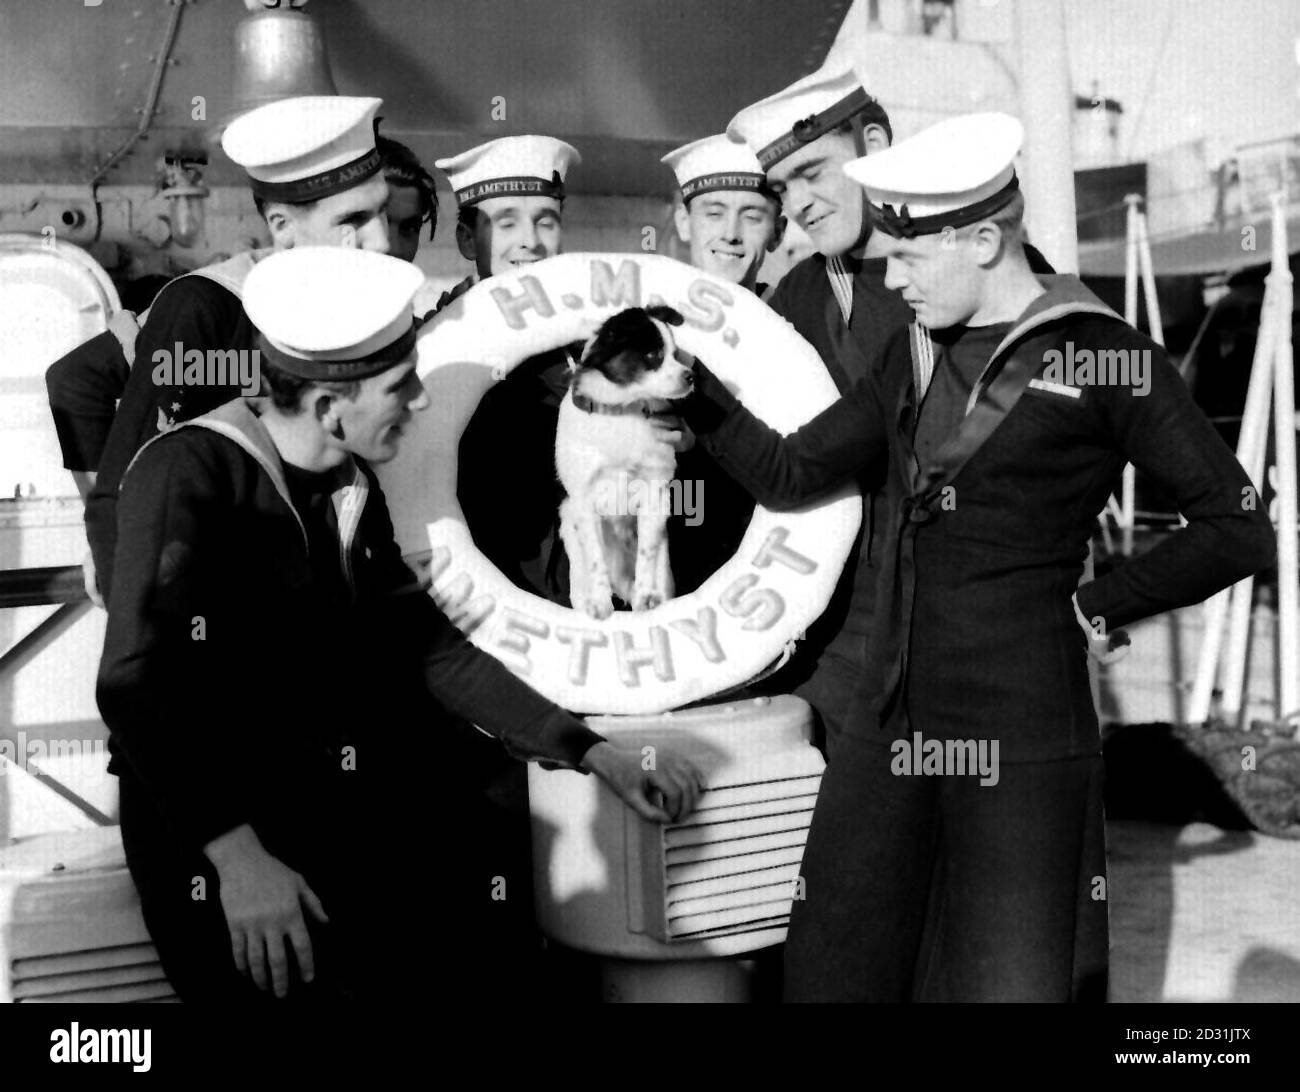 HMS AMETHYST 1952: The frigate that made a spectacular dash down the Yangste River under Chinese guns returned to Devonport after 2 years in the Far East. Here are some of the crew with the ship's dog, Joe, who was 'recruited' in Malta. He wears the Korea ribbons of the UN and the British Empire. Stock Photo